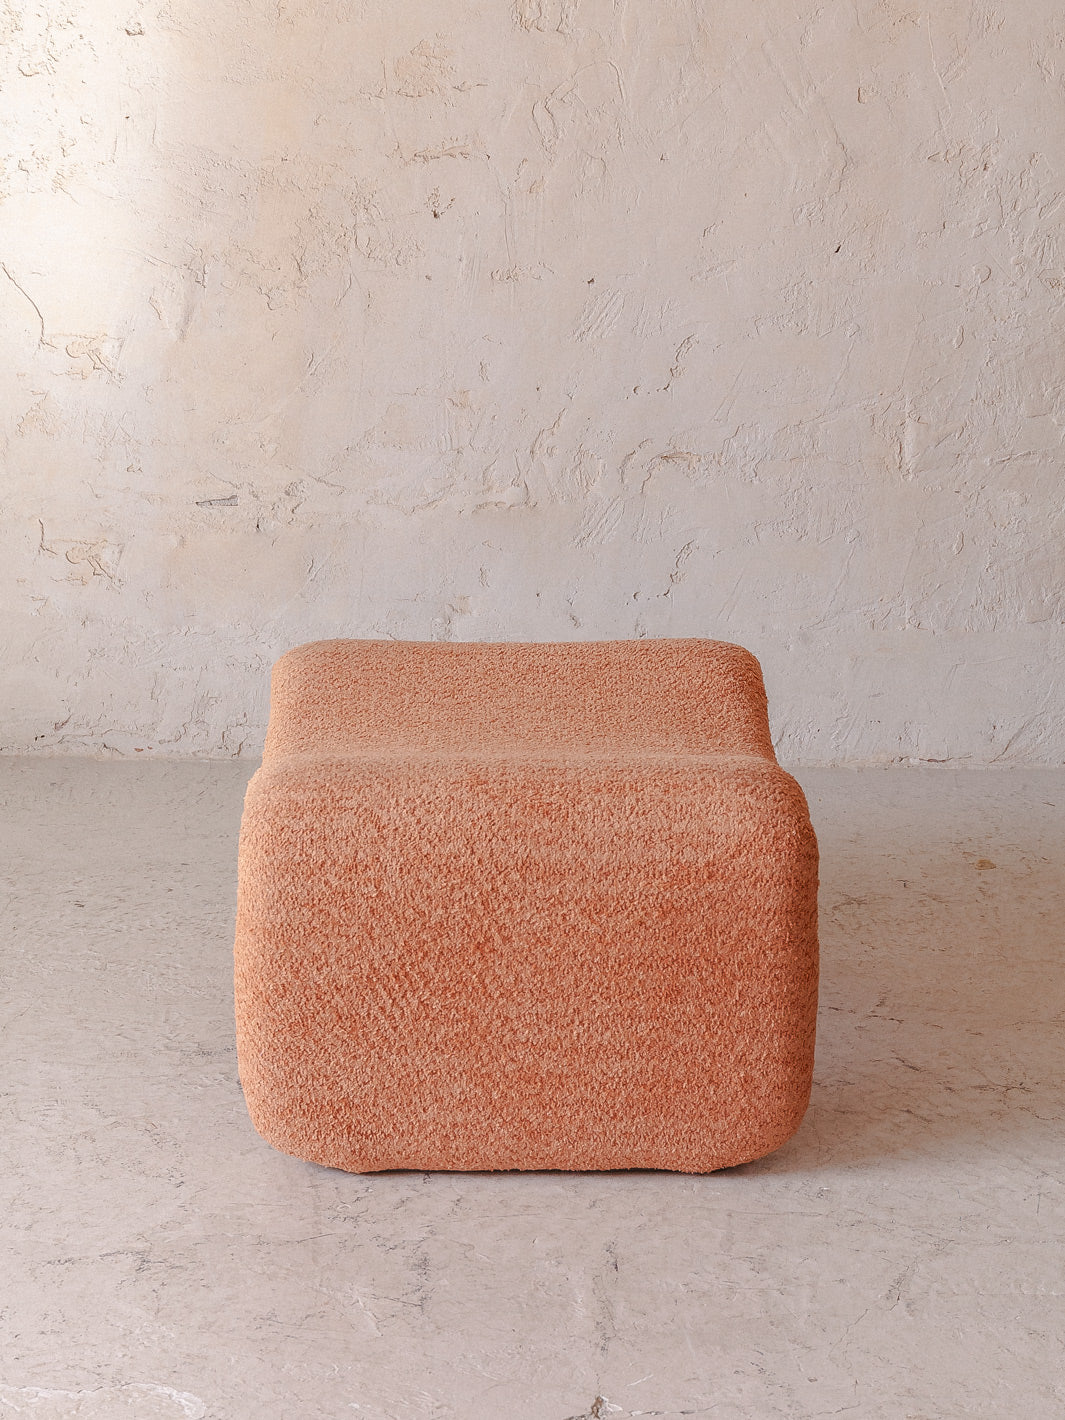 Olivier Mourgue nude pouf